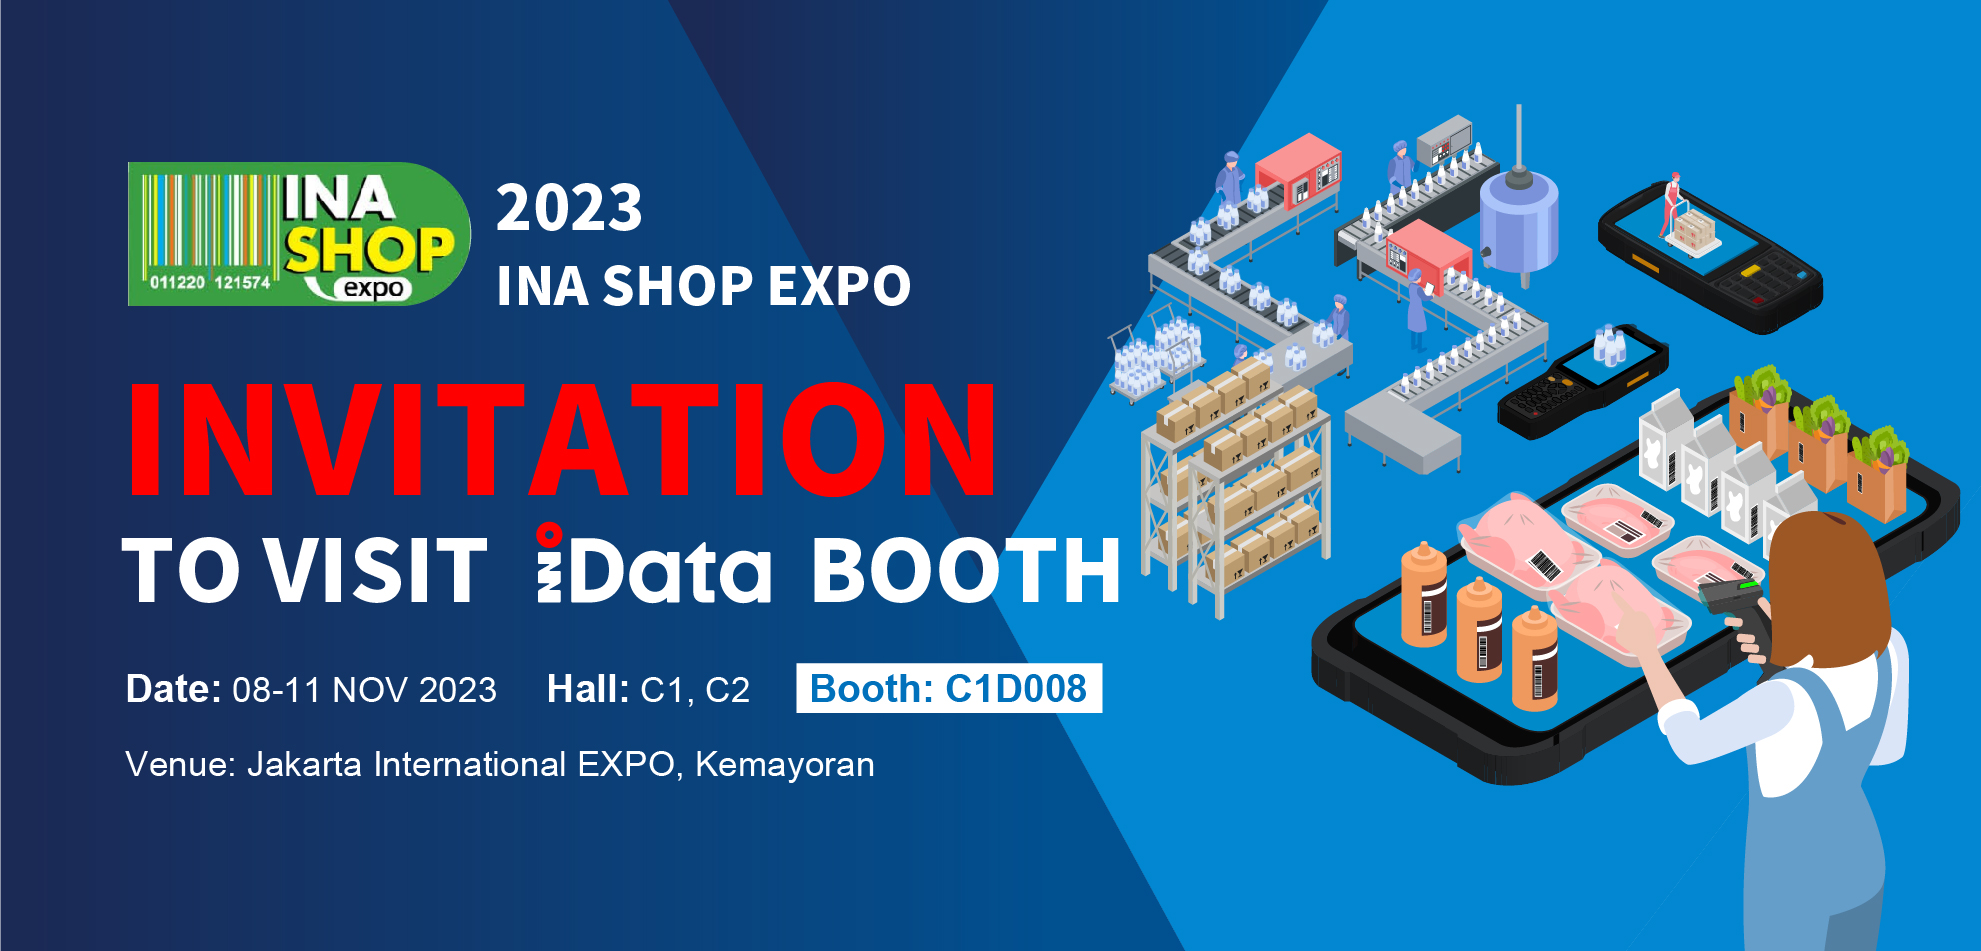 Get ready for INA SHOP 2023 in Jakarta, Indonesia